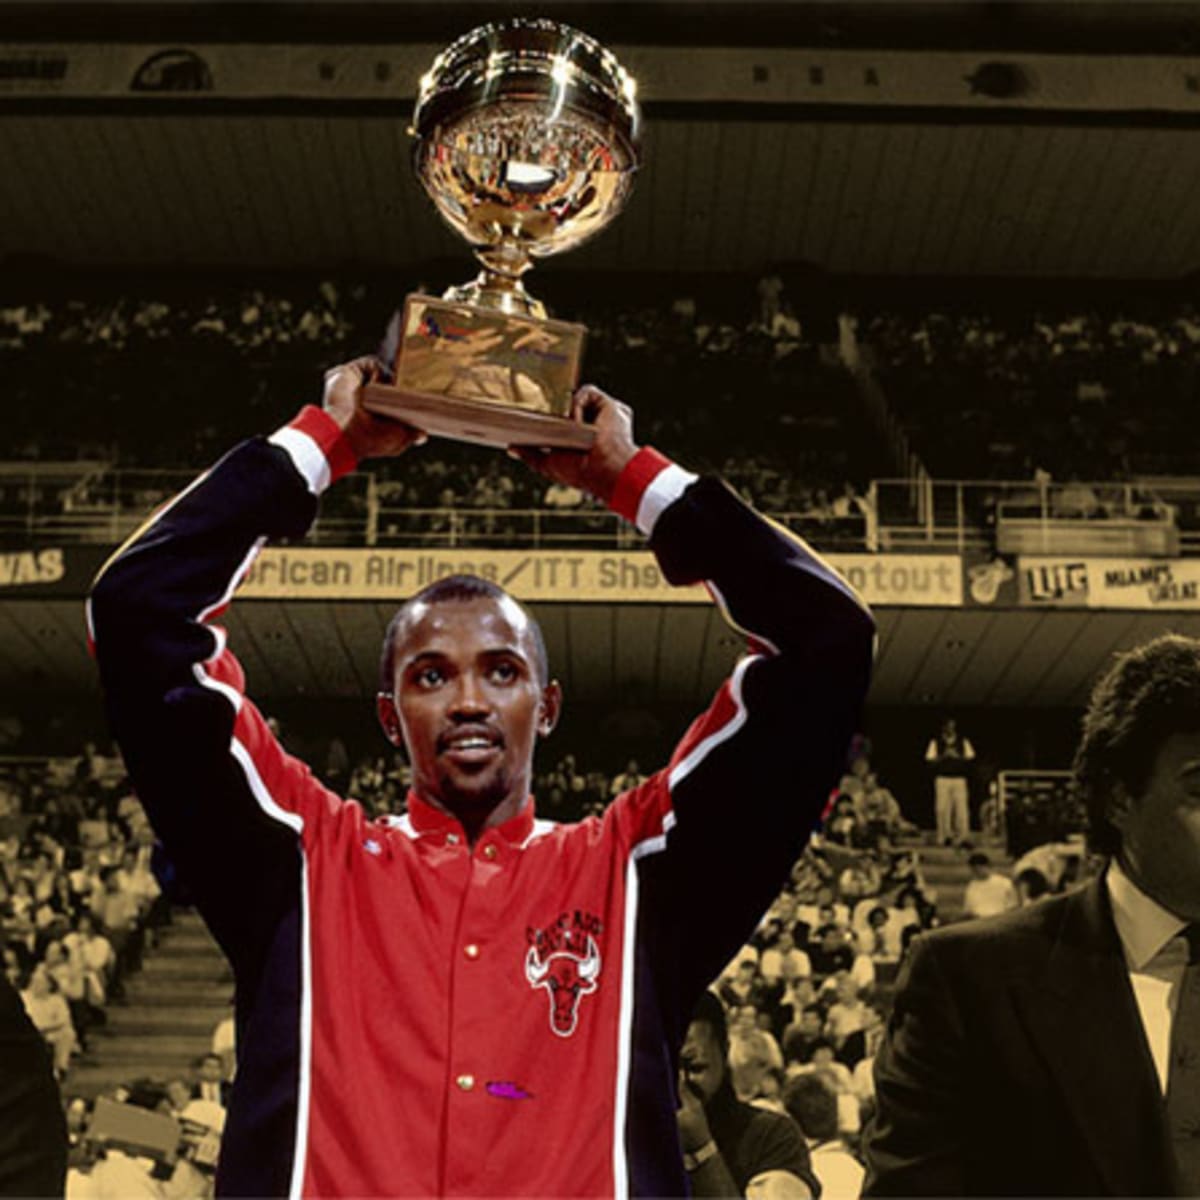 Craig Hodges Played Political Basketball, And It Cost Him His Pro